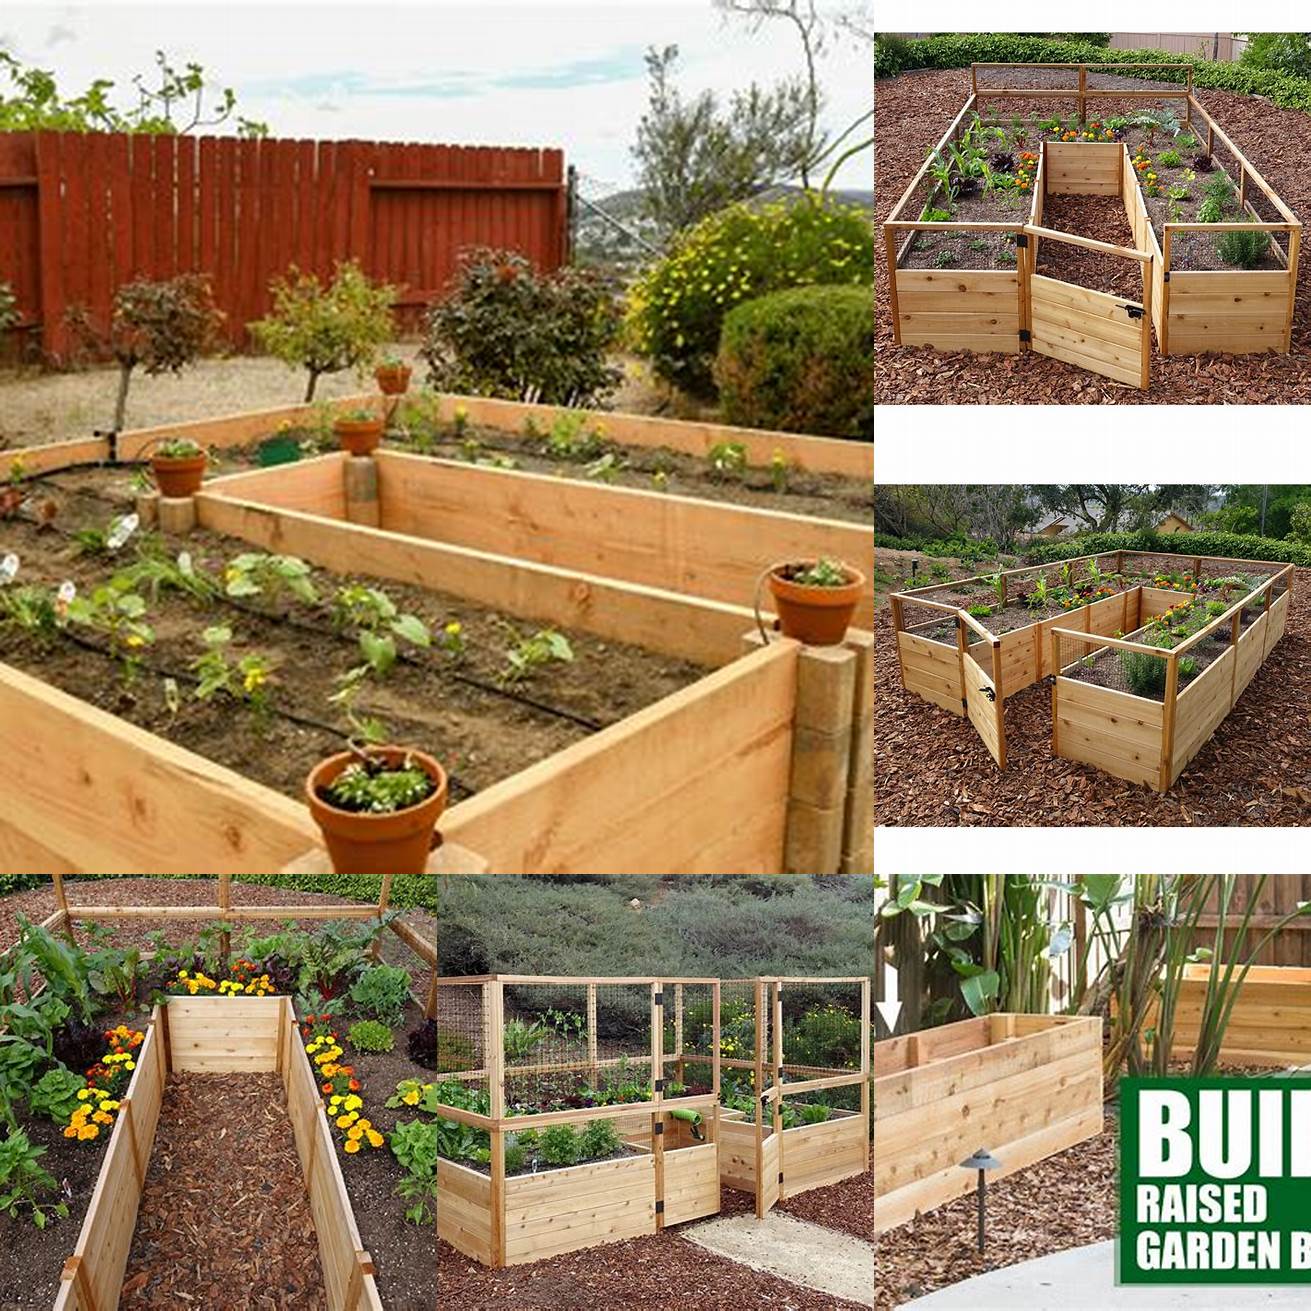 Check for Pests Cedar Raised Garden Beds may attract pests